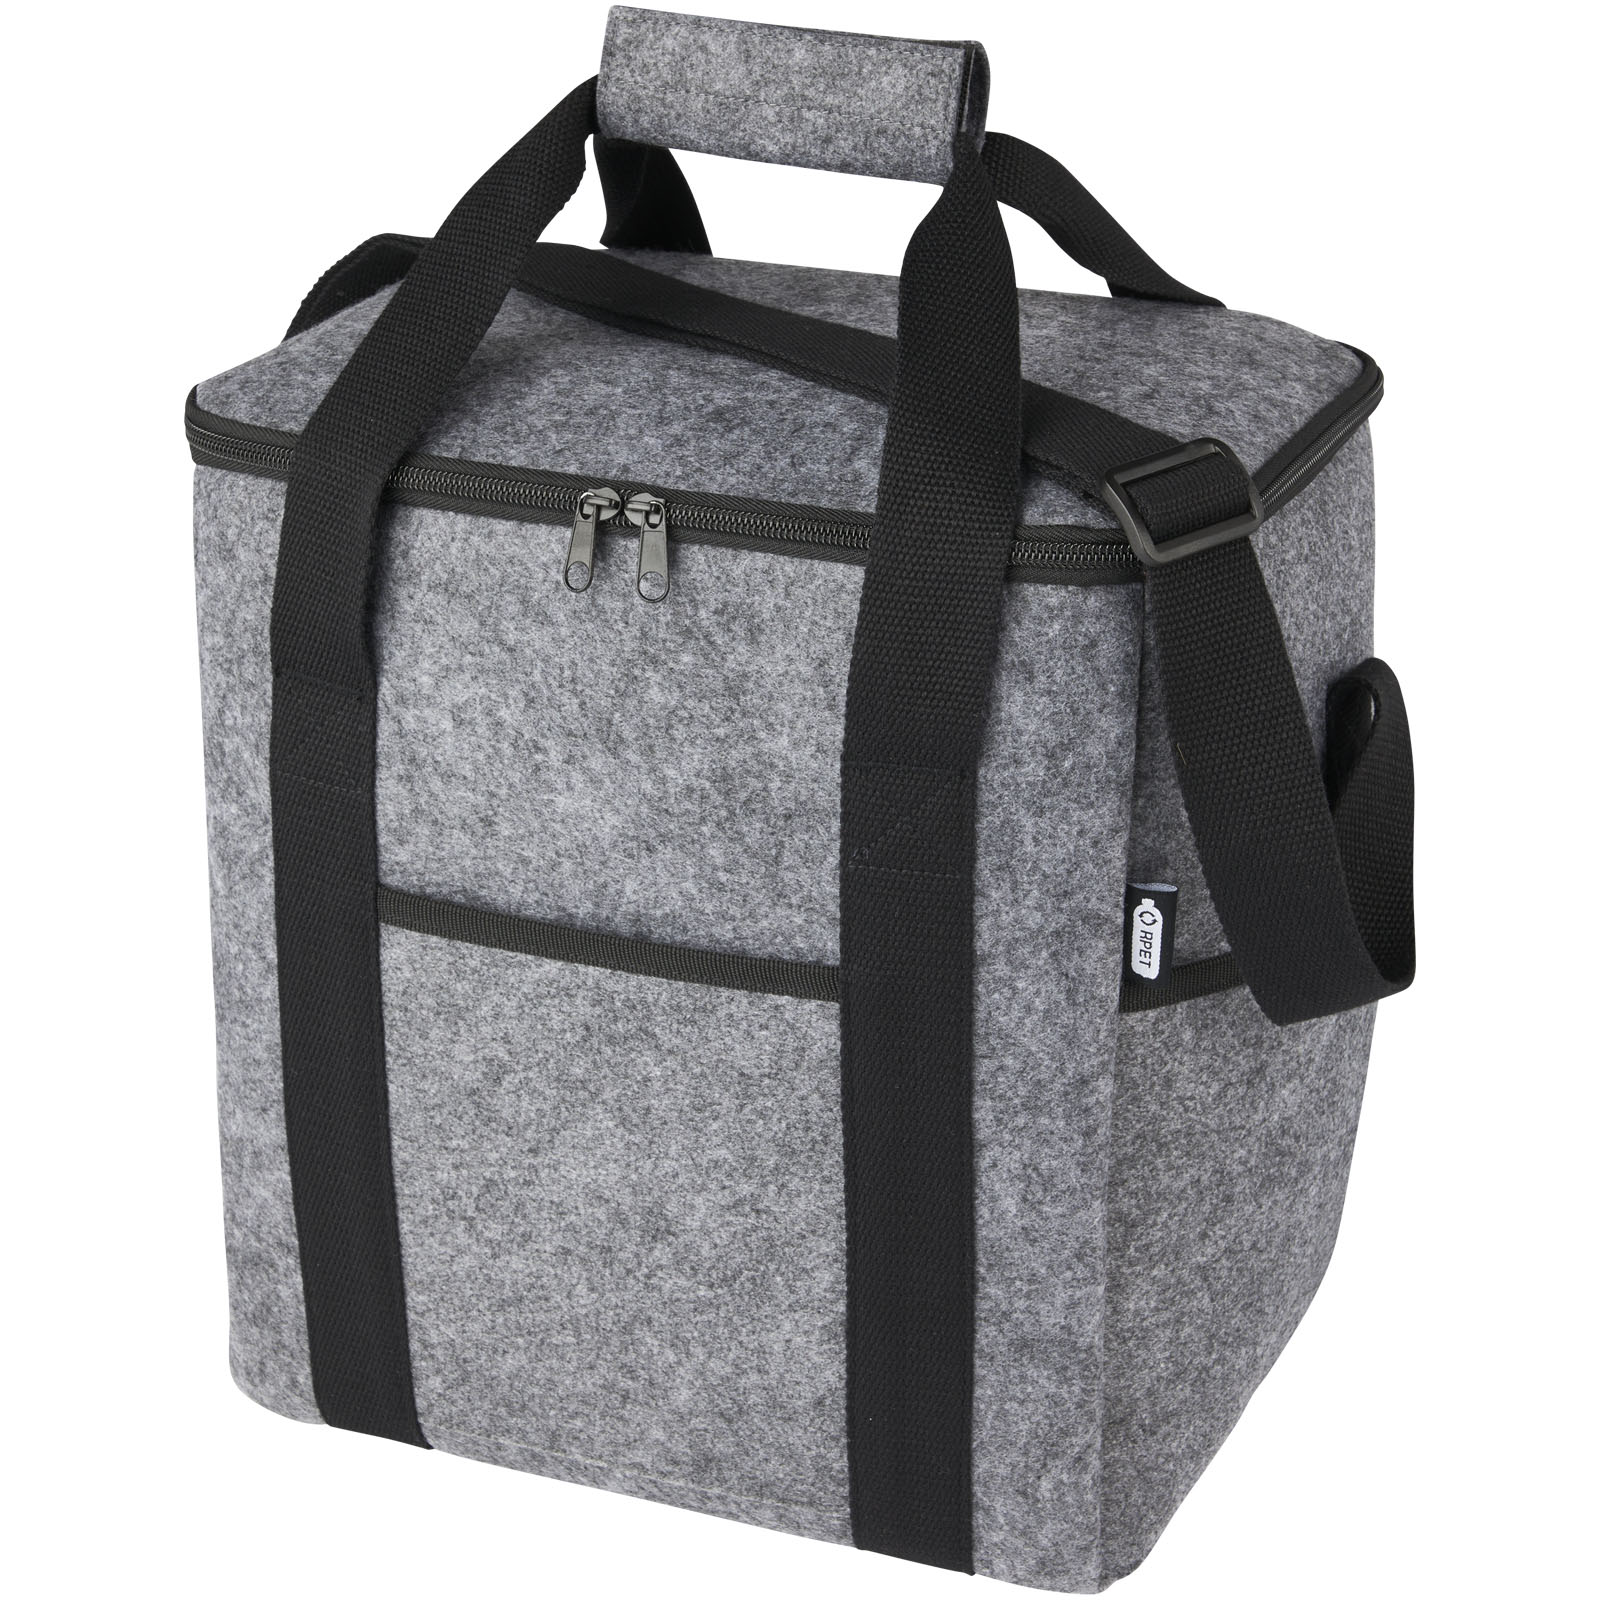 Sac isotherme, Sac isotherme publicitaire